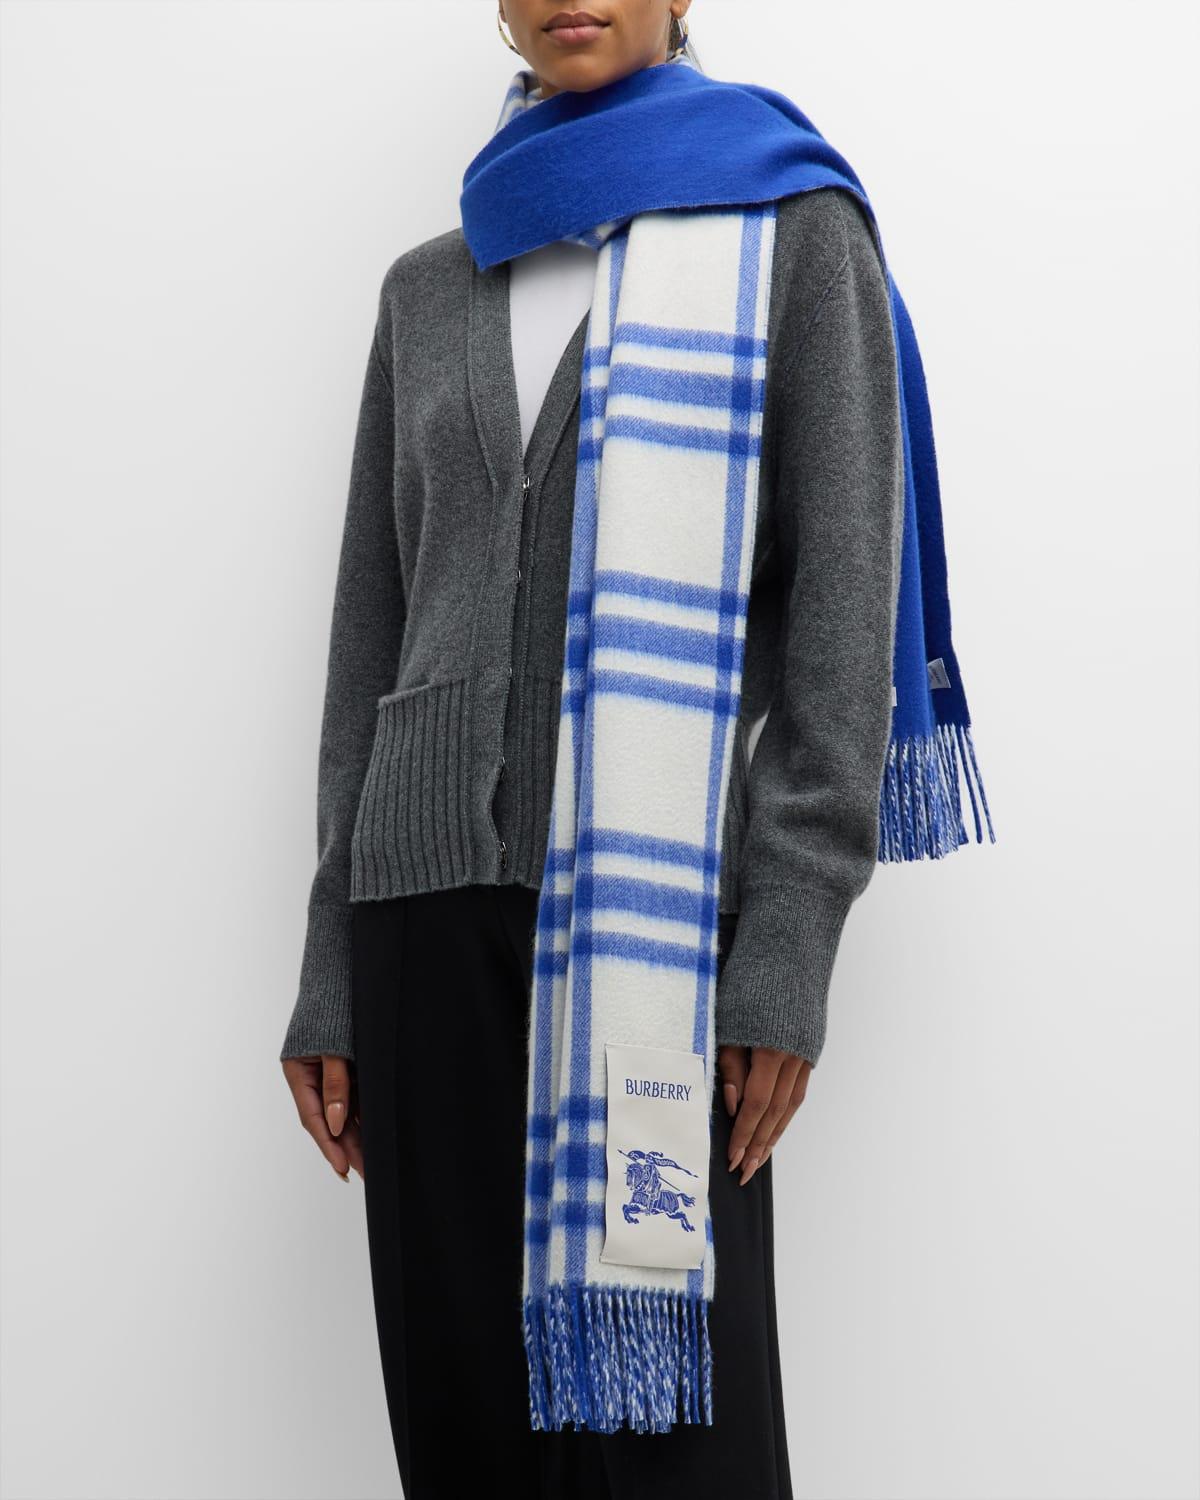 Burberry Reversible Tri-bar Check Cashmere Scarf in Blue | Lyst